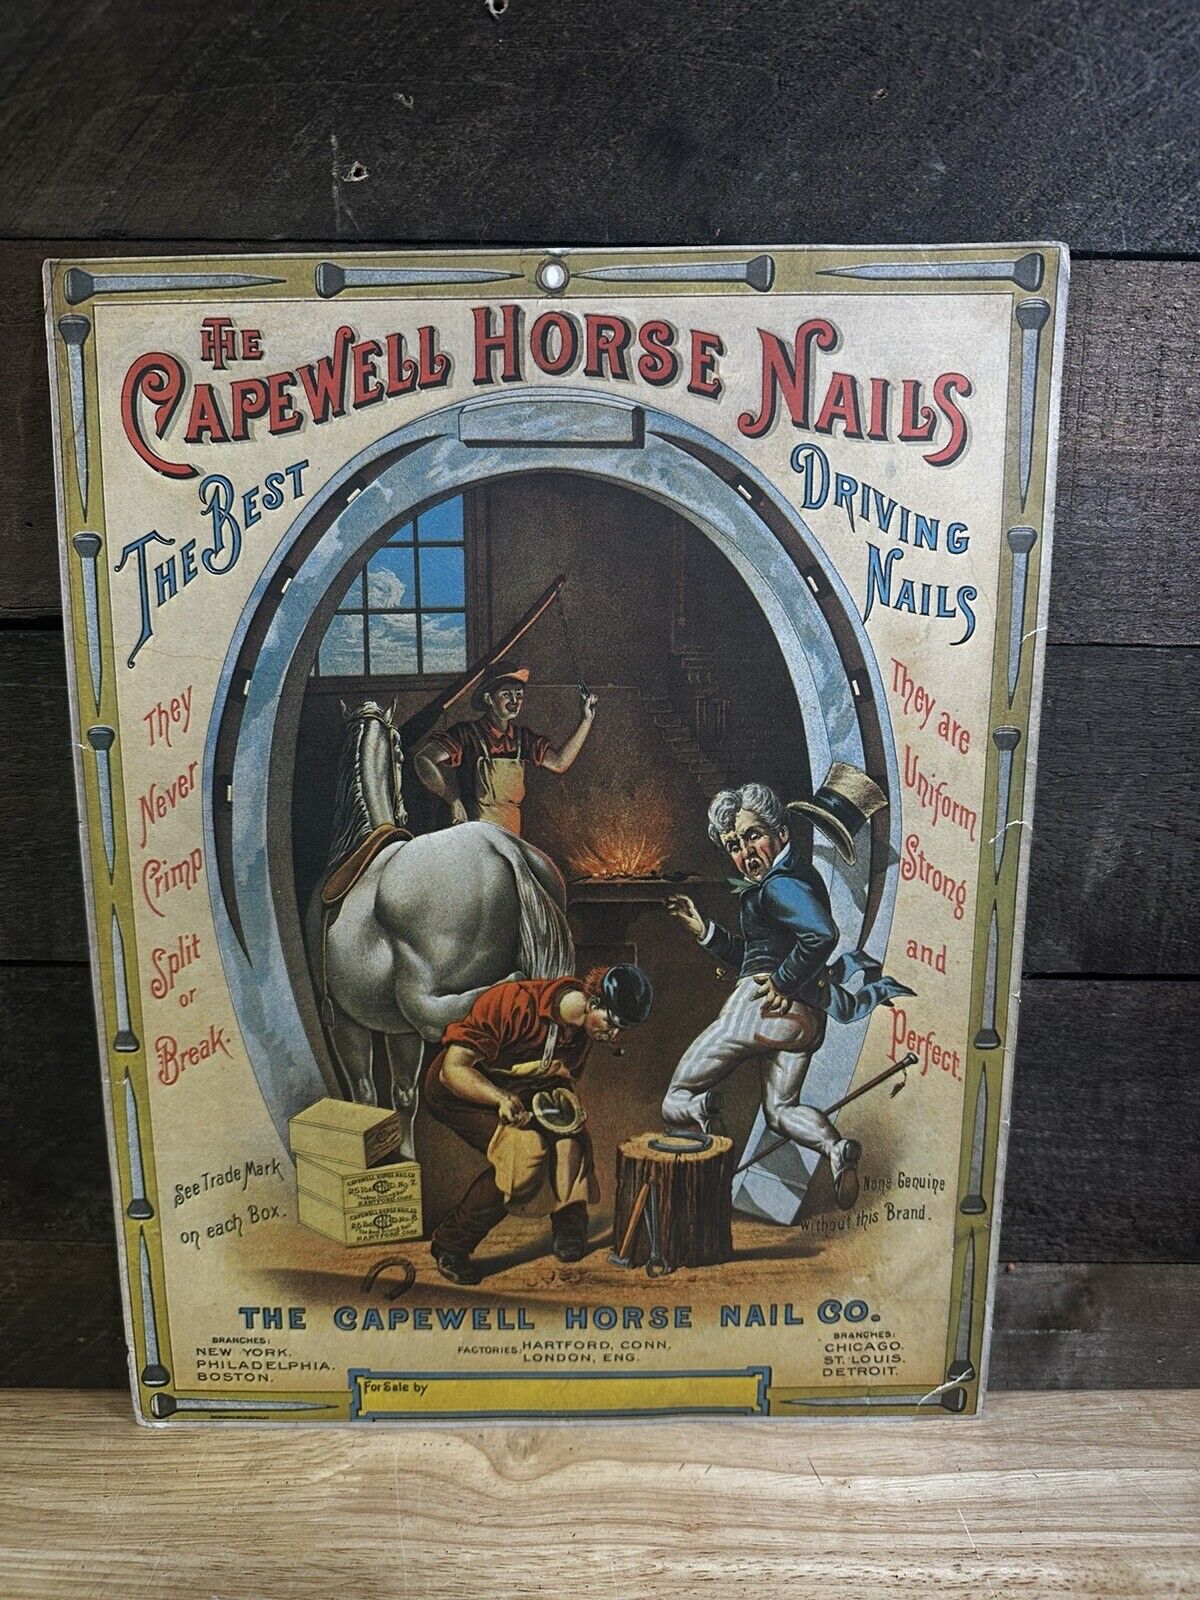 Antique 1898 Capewell Horse Nail Co. Poster 